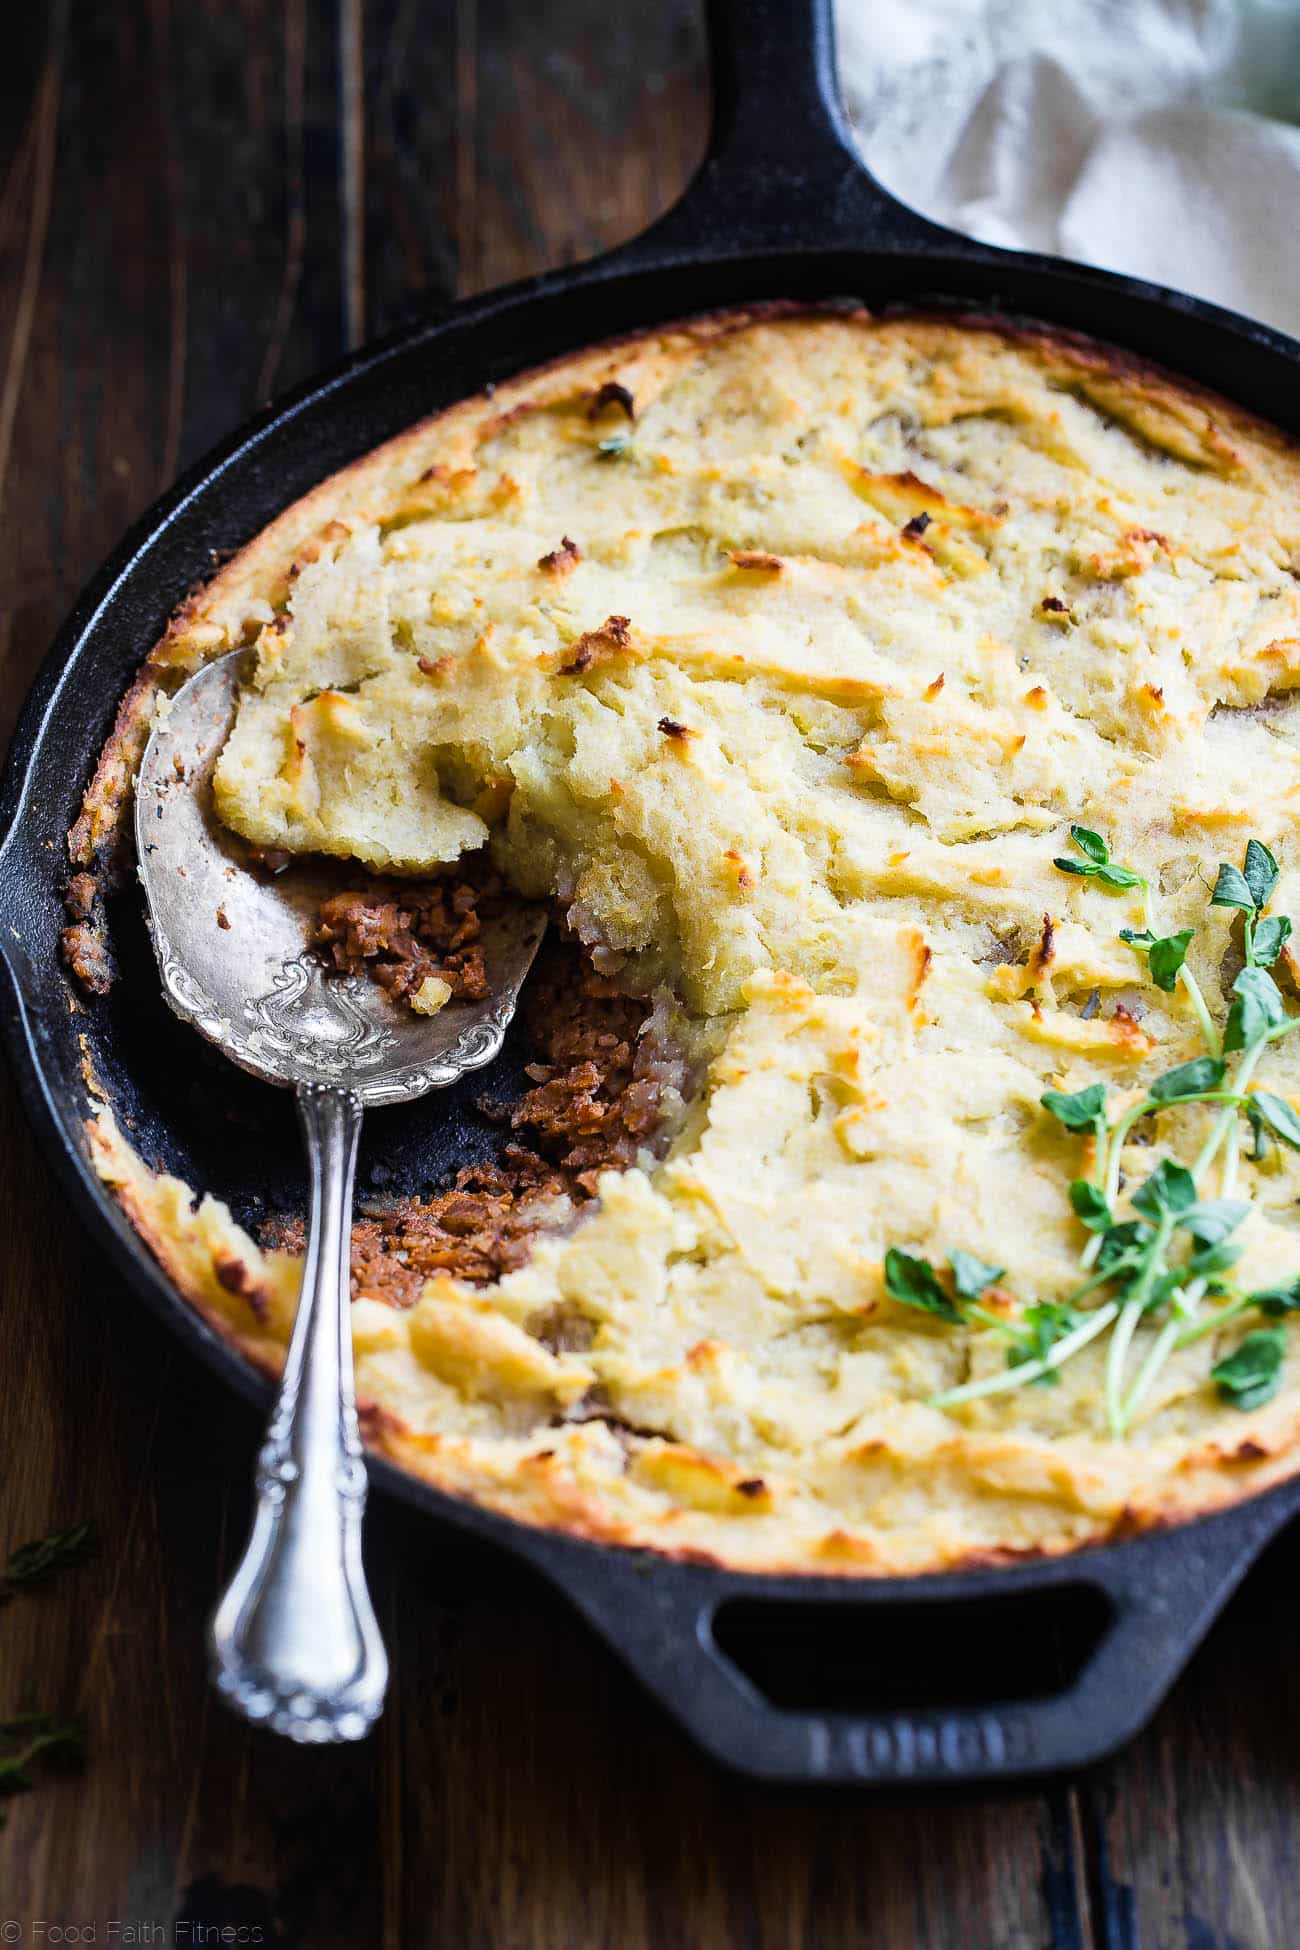 Vegetarian Shepherd's Pie - This whole30 and paleo shepherd's pie is a gluten, grain, and dairy free remake of the classic that is just as cozy and comforting! You'll never believe it's vegan friendly and healthy! | Foodfaithfitness.com | @FoodFaithFit